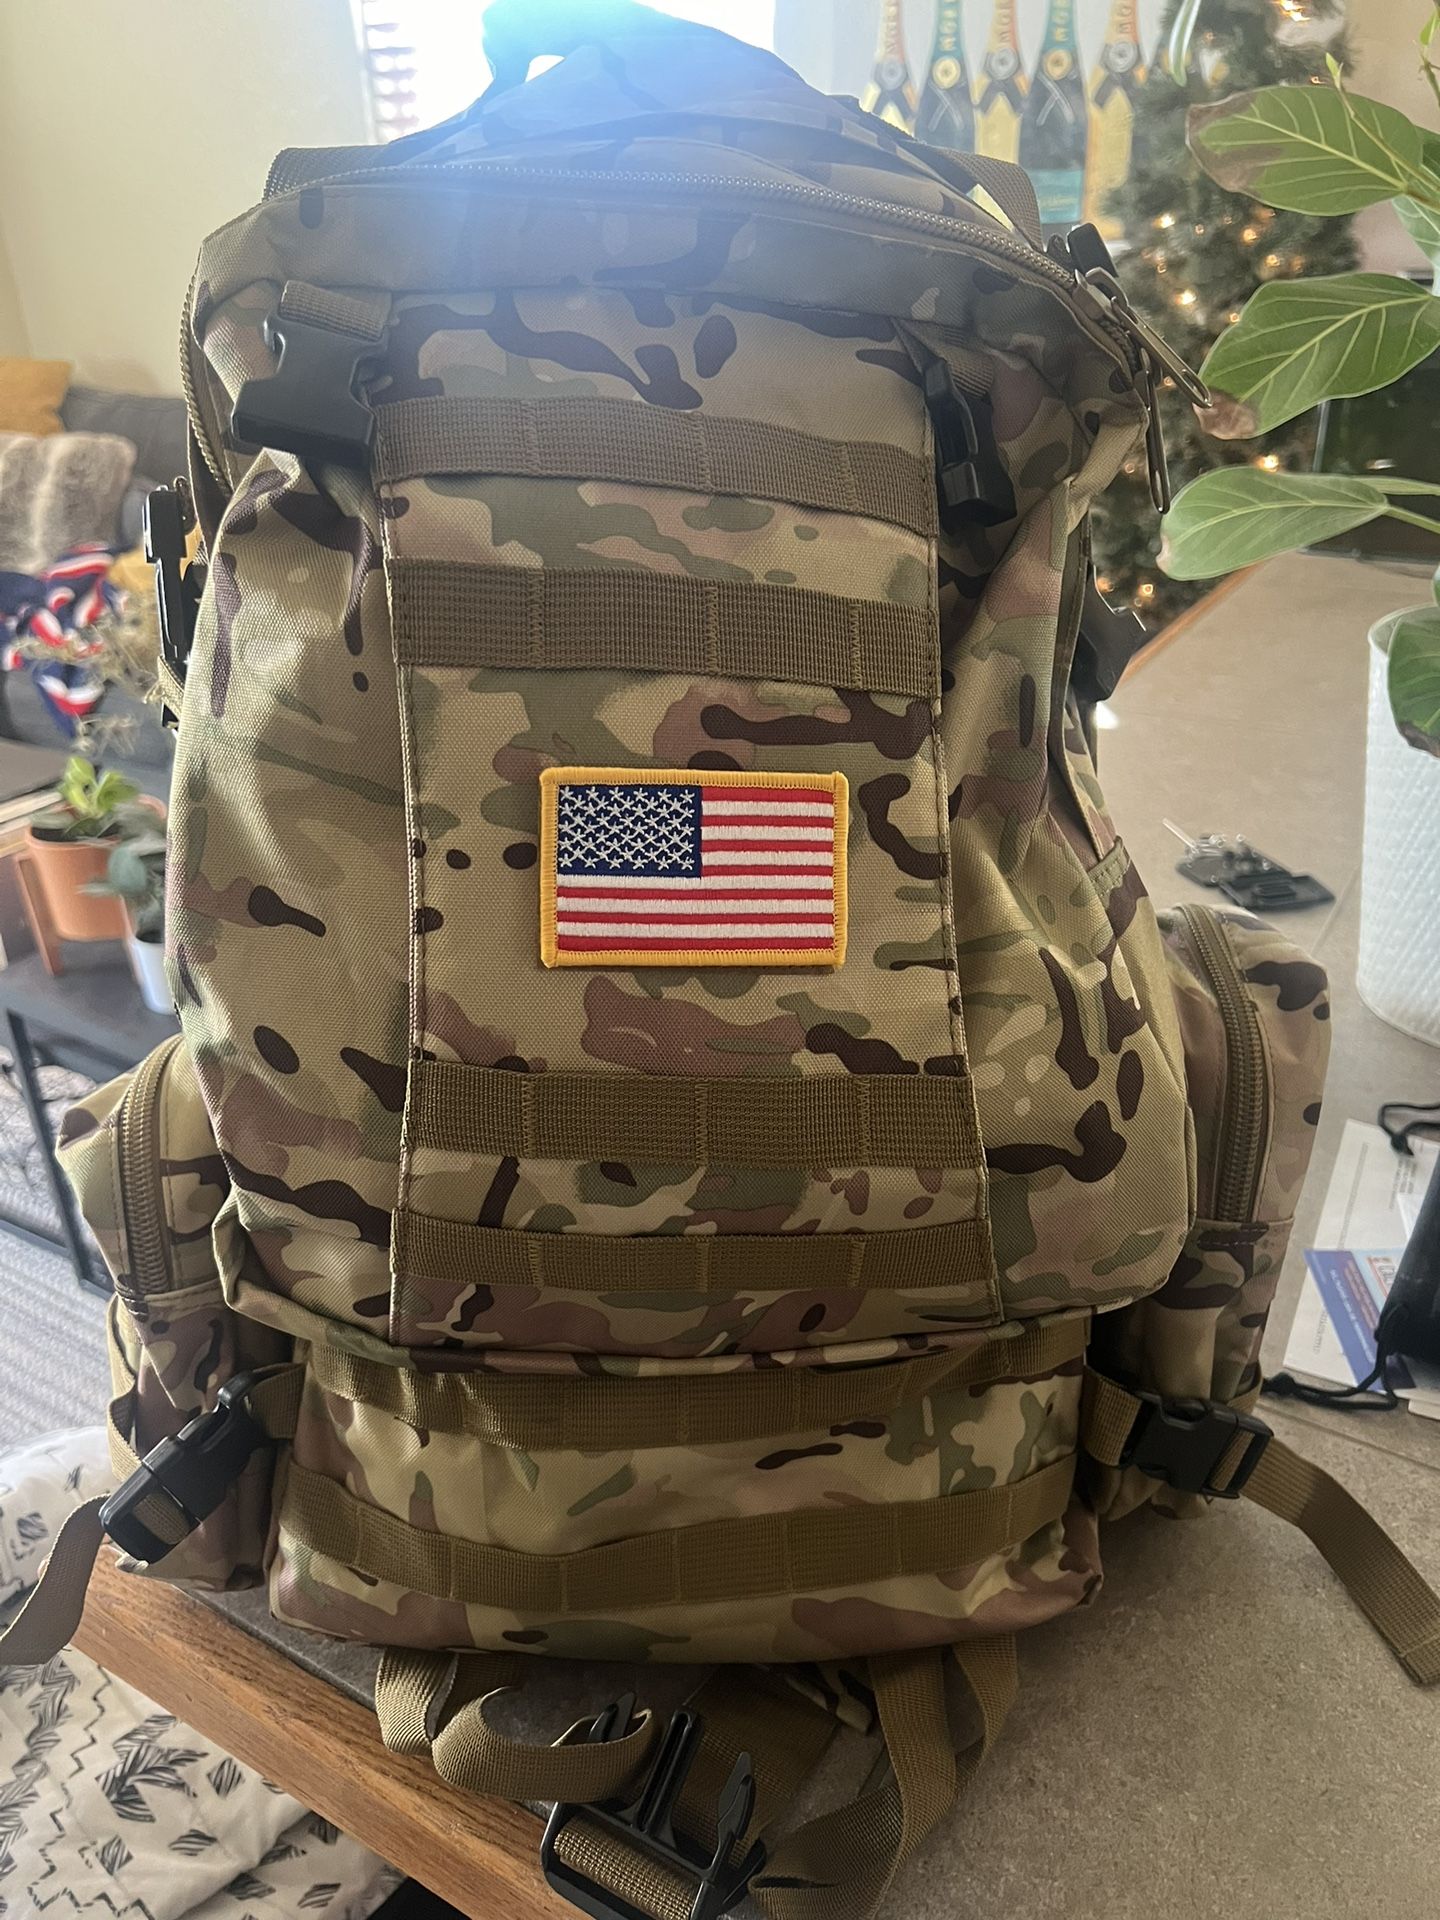 Survival Backpack 48 Hr With Survival Gear *UN USED*